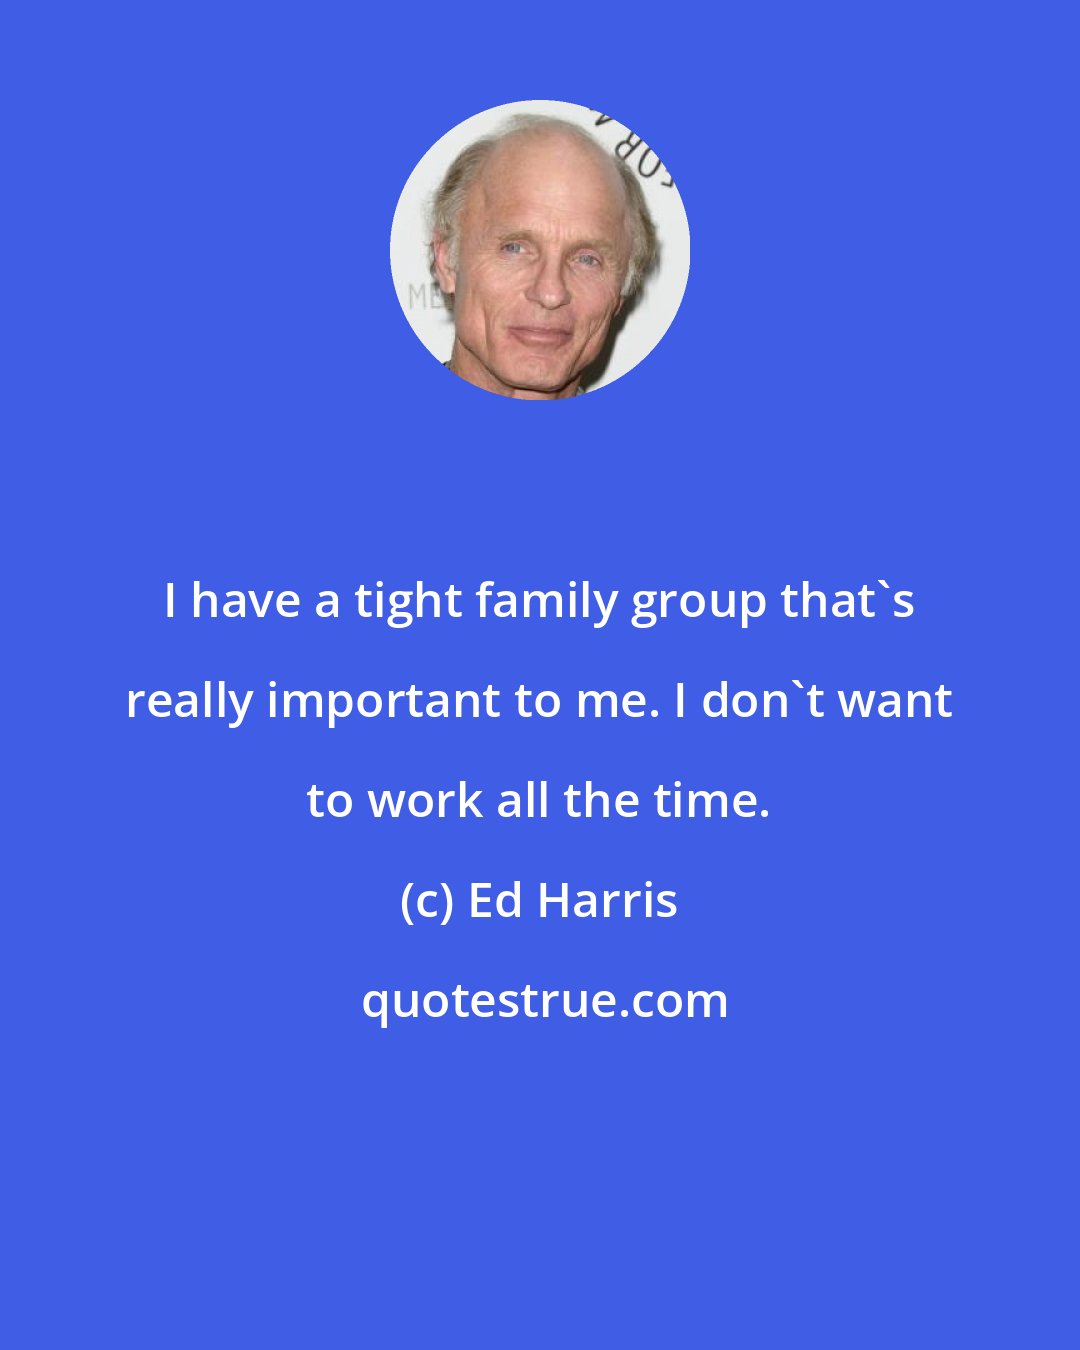 Ed Harris: I have a tight family group that's really important to me. I don't want to work all the time.